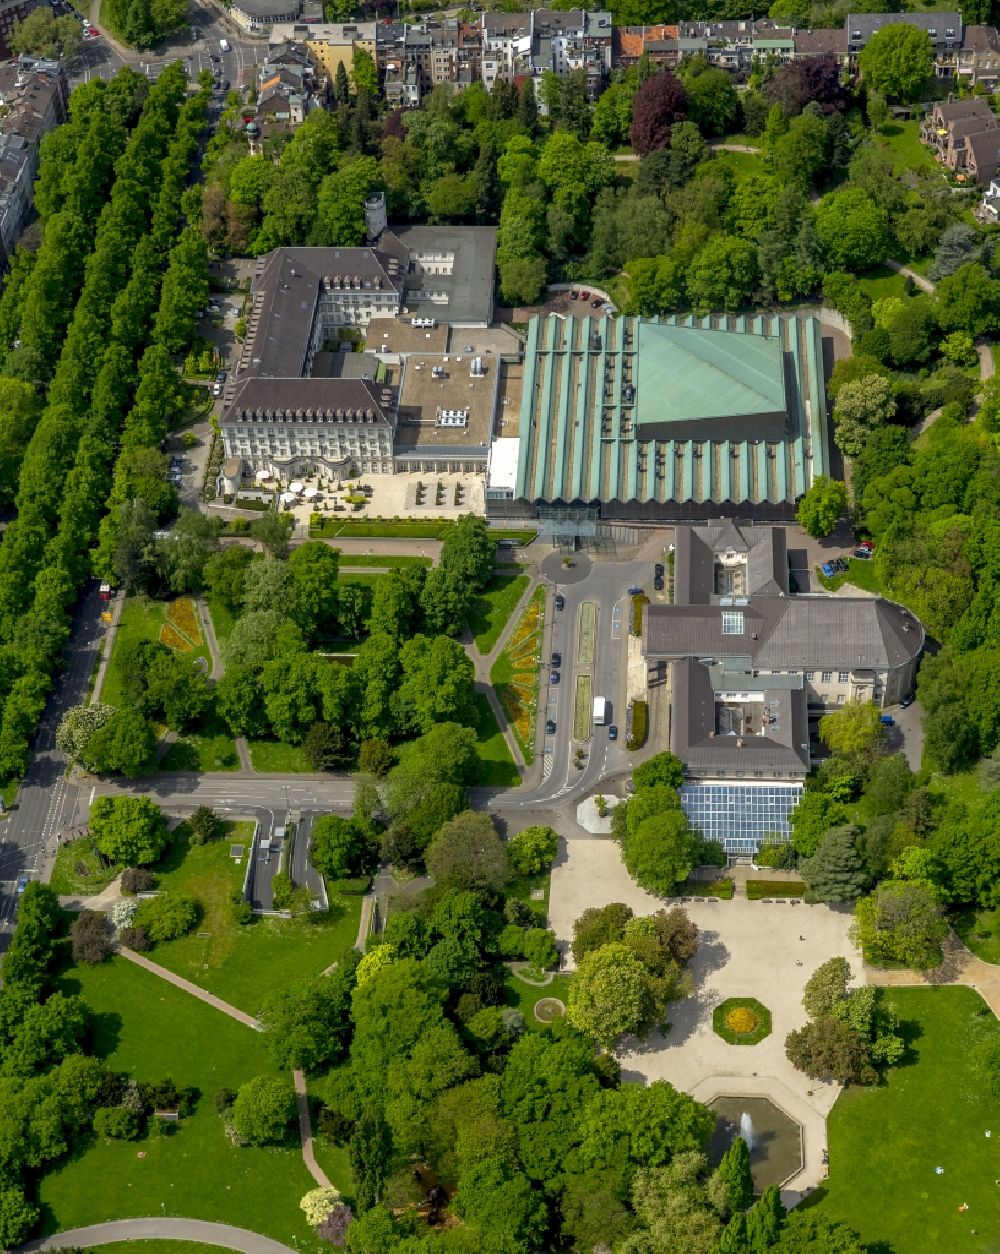 Aerial photograph Aachen - Spa park and historical buildings in the Northeast of the city centre of Aachen in the state of North Rhine-Westphalia. Aachen is a spa town, diocesan town and the western-most major city of Germany. The park includes the Aachen Casino in the New Spa Building, the Hotel Pullman Aachen Quellenhof and the conference and event location Eurogress Aachen with its distinct green roof